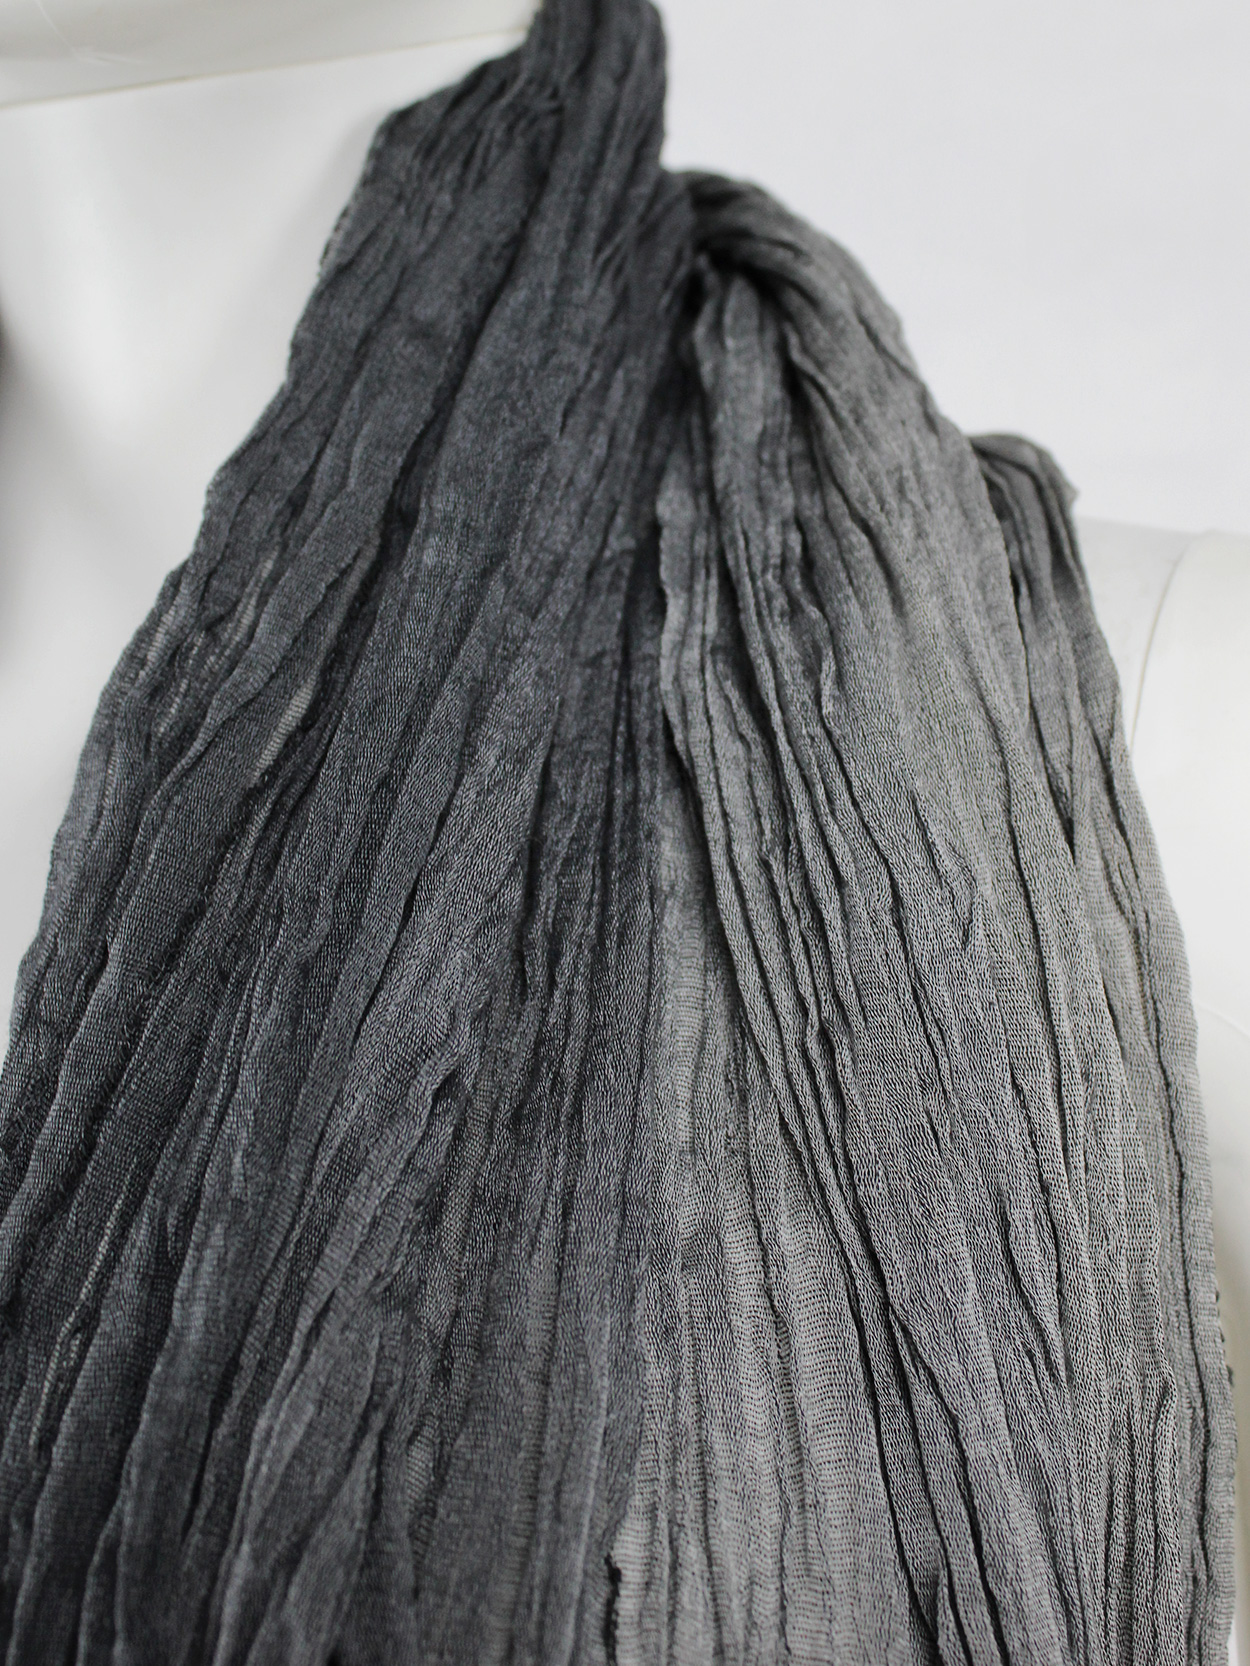 Issey Miyake grey ombre scarf with wrinkled pleats 1980s 80s 6845